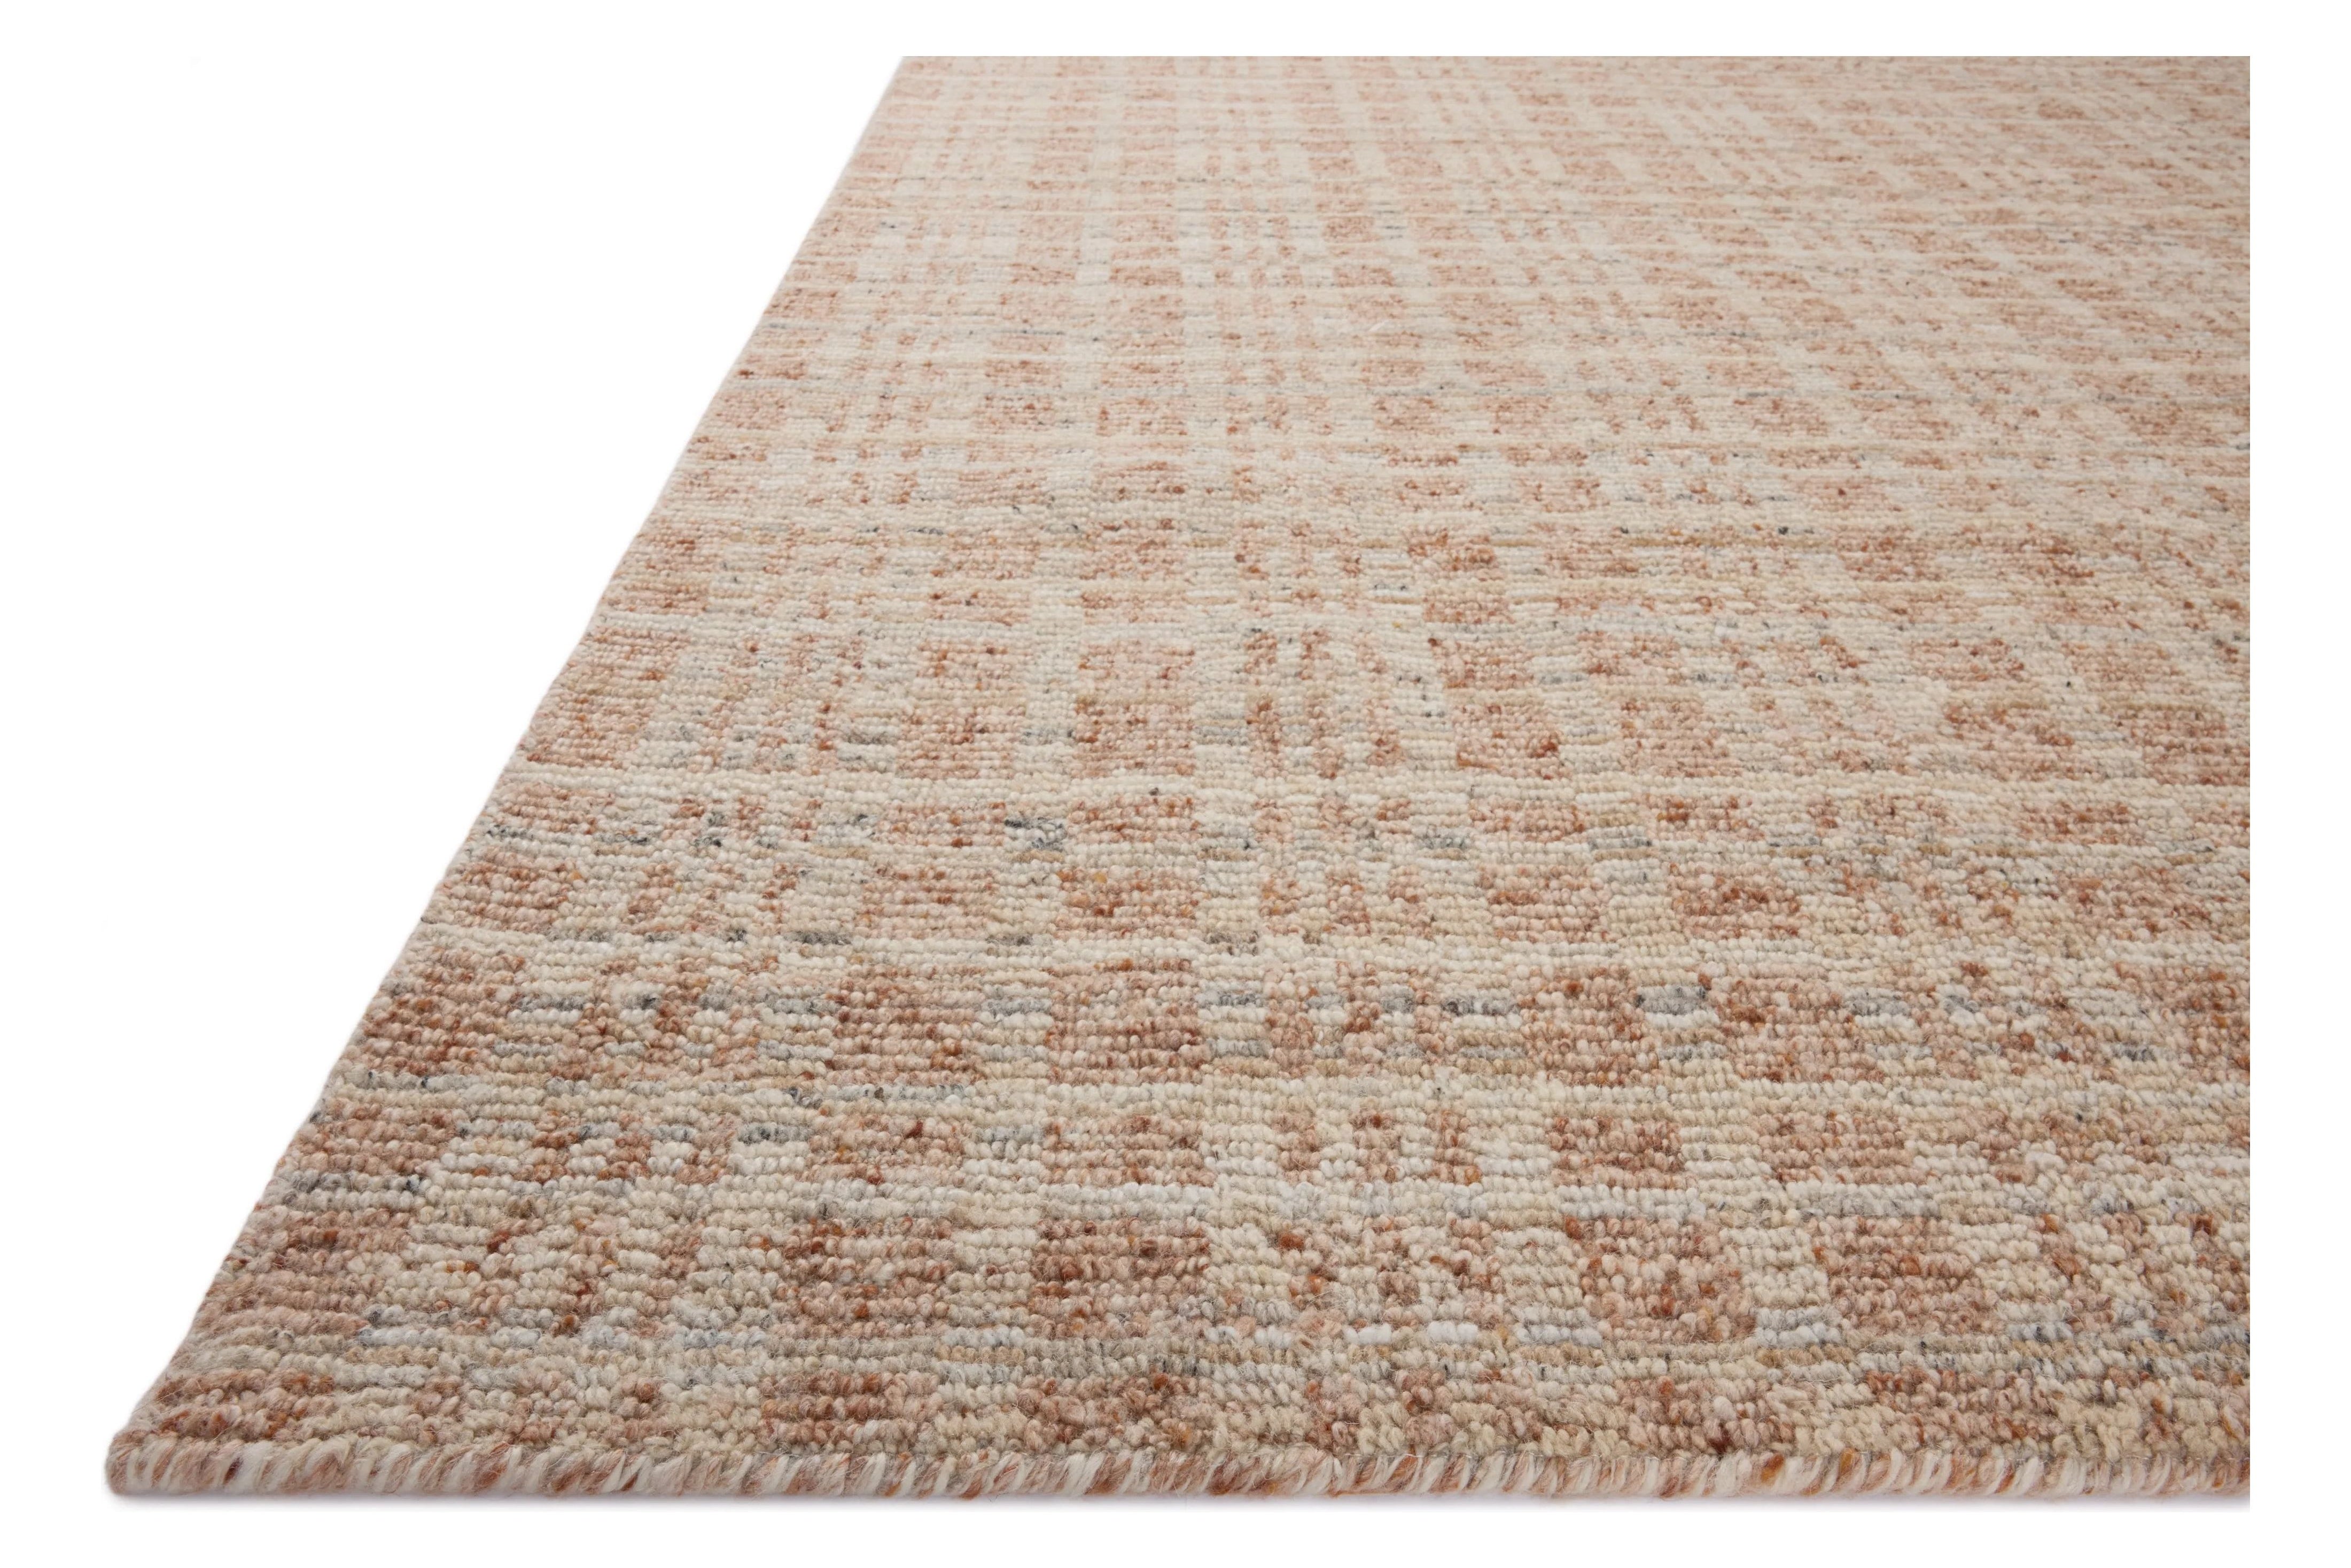 The Sonya Terracotta / Natural Rug is a hand-loomed area rug with a light, airy palette and understated graphic design. The rug’s textural pile is a soft blend of wool and nylon that creates dimension in living rooms, bedrooms, and more. Amethyst Home provides interior design, new home construction design consulting, vintage area rugs, and lighting in the Washington metro area.